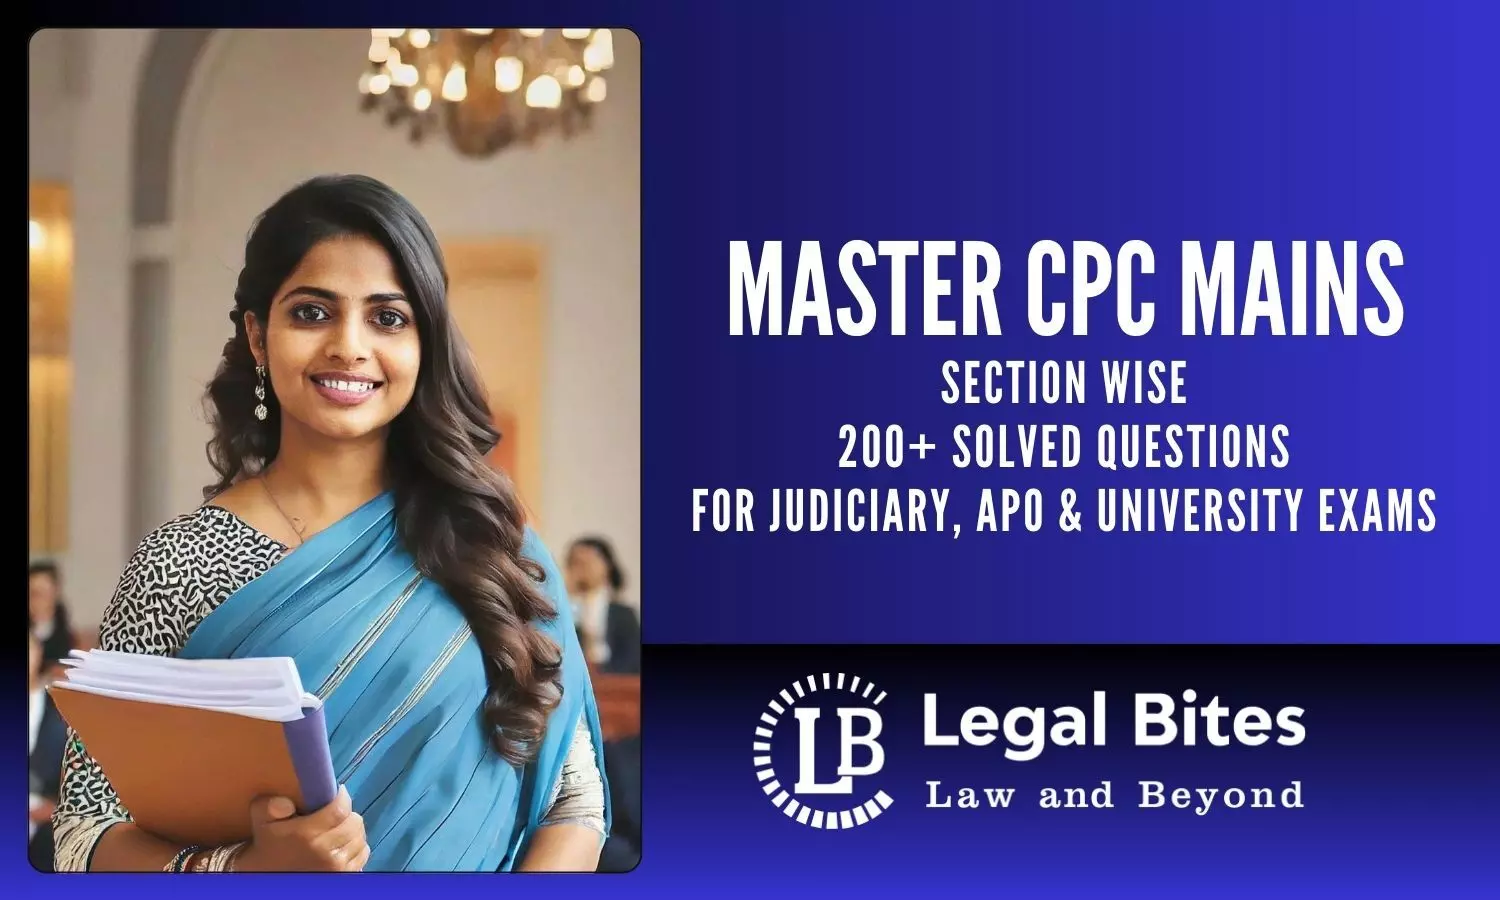 Master CPC Mains: Legal Bites CPC Solved Questions Series for Judiciary, APO & University Exams